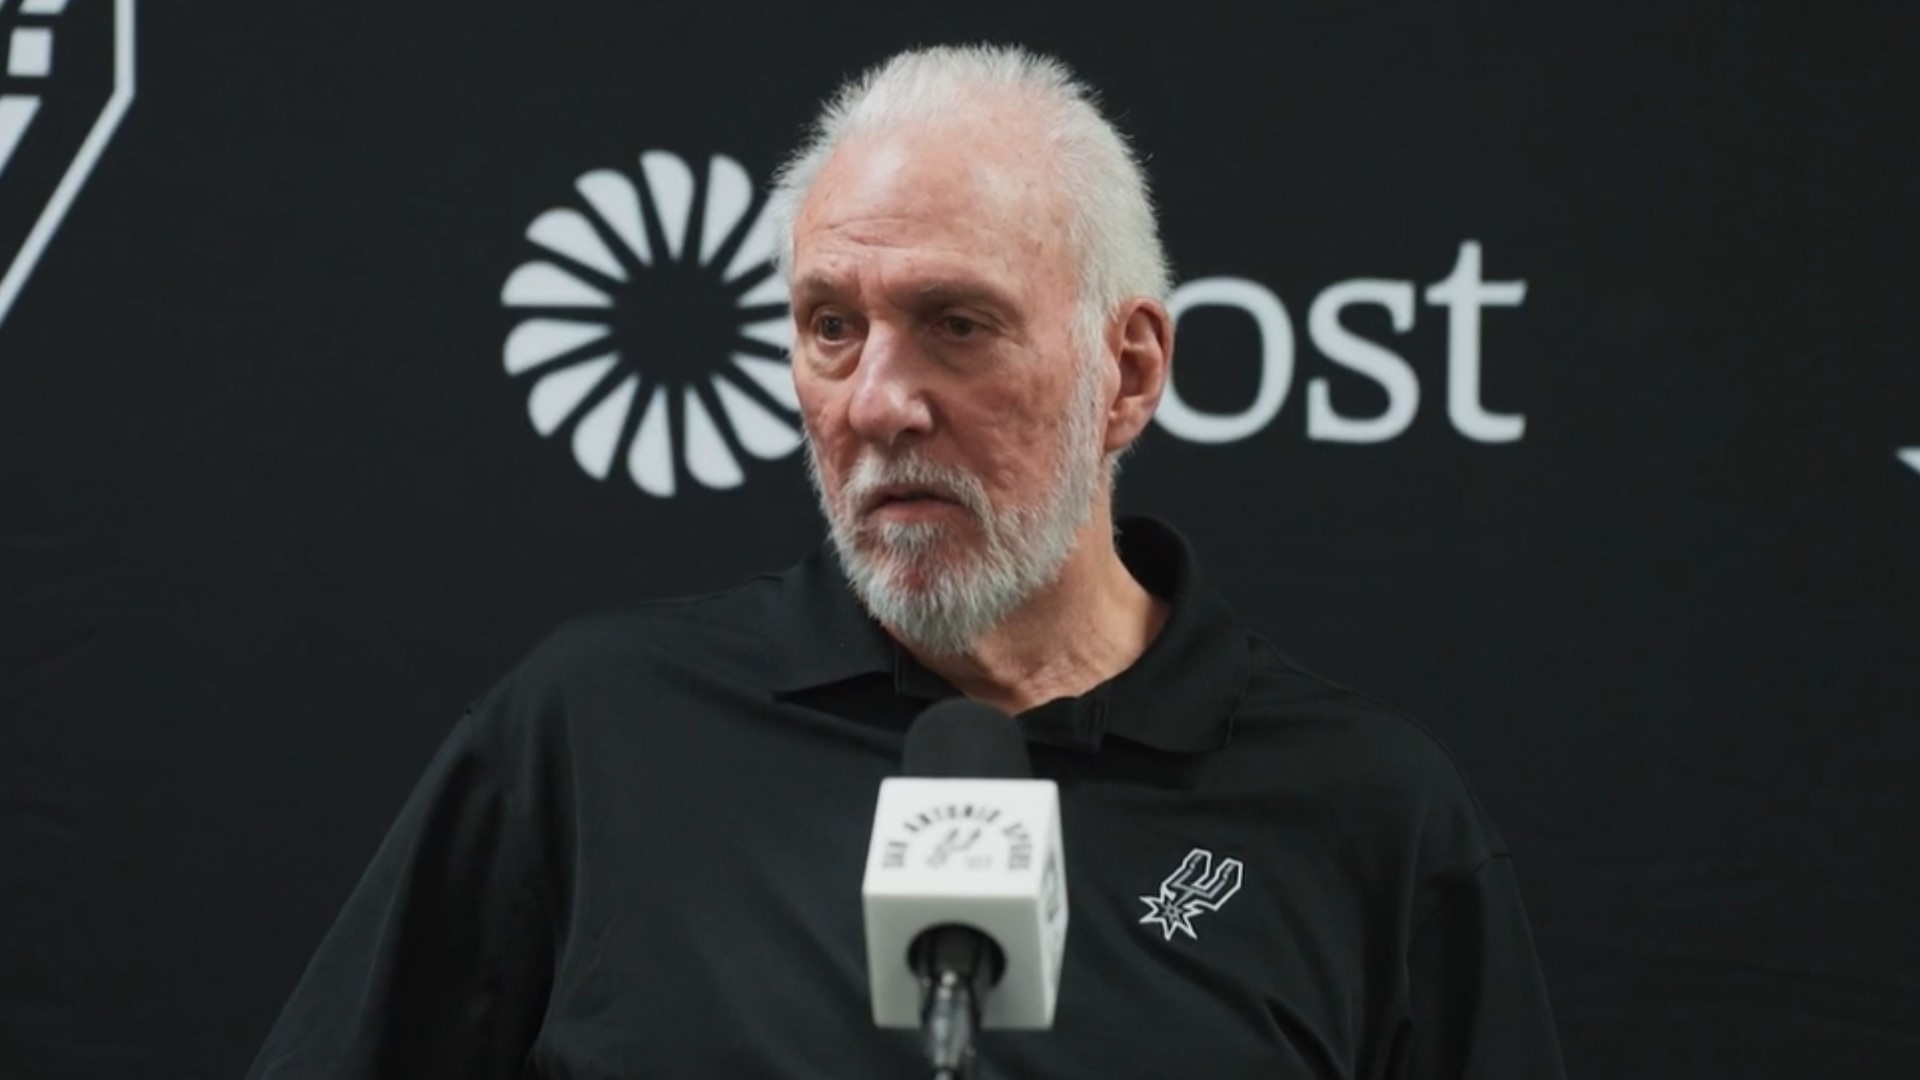 The Spurs' head coach was asked repeatedly about grabbing the microphone and telling the home crowd 'It's got no class, it's not who we are. Knock off the booing."